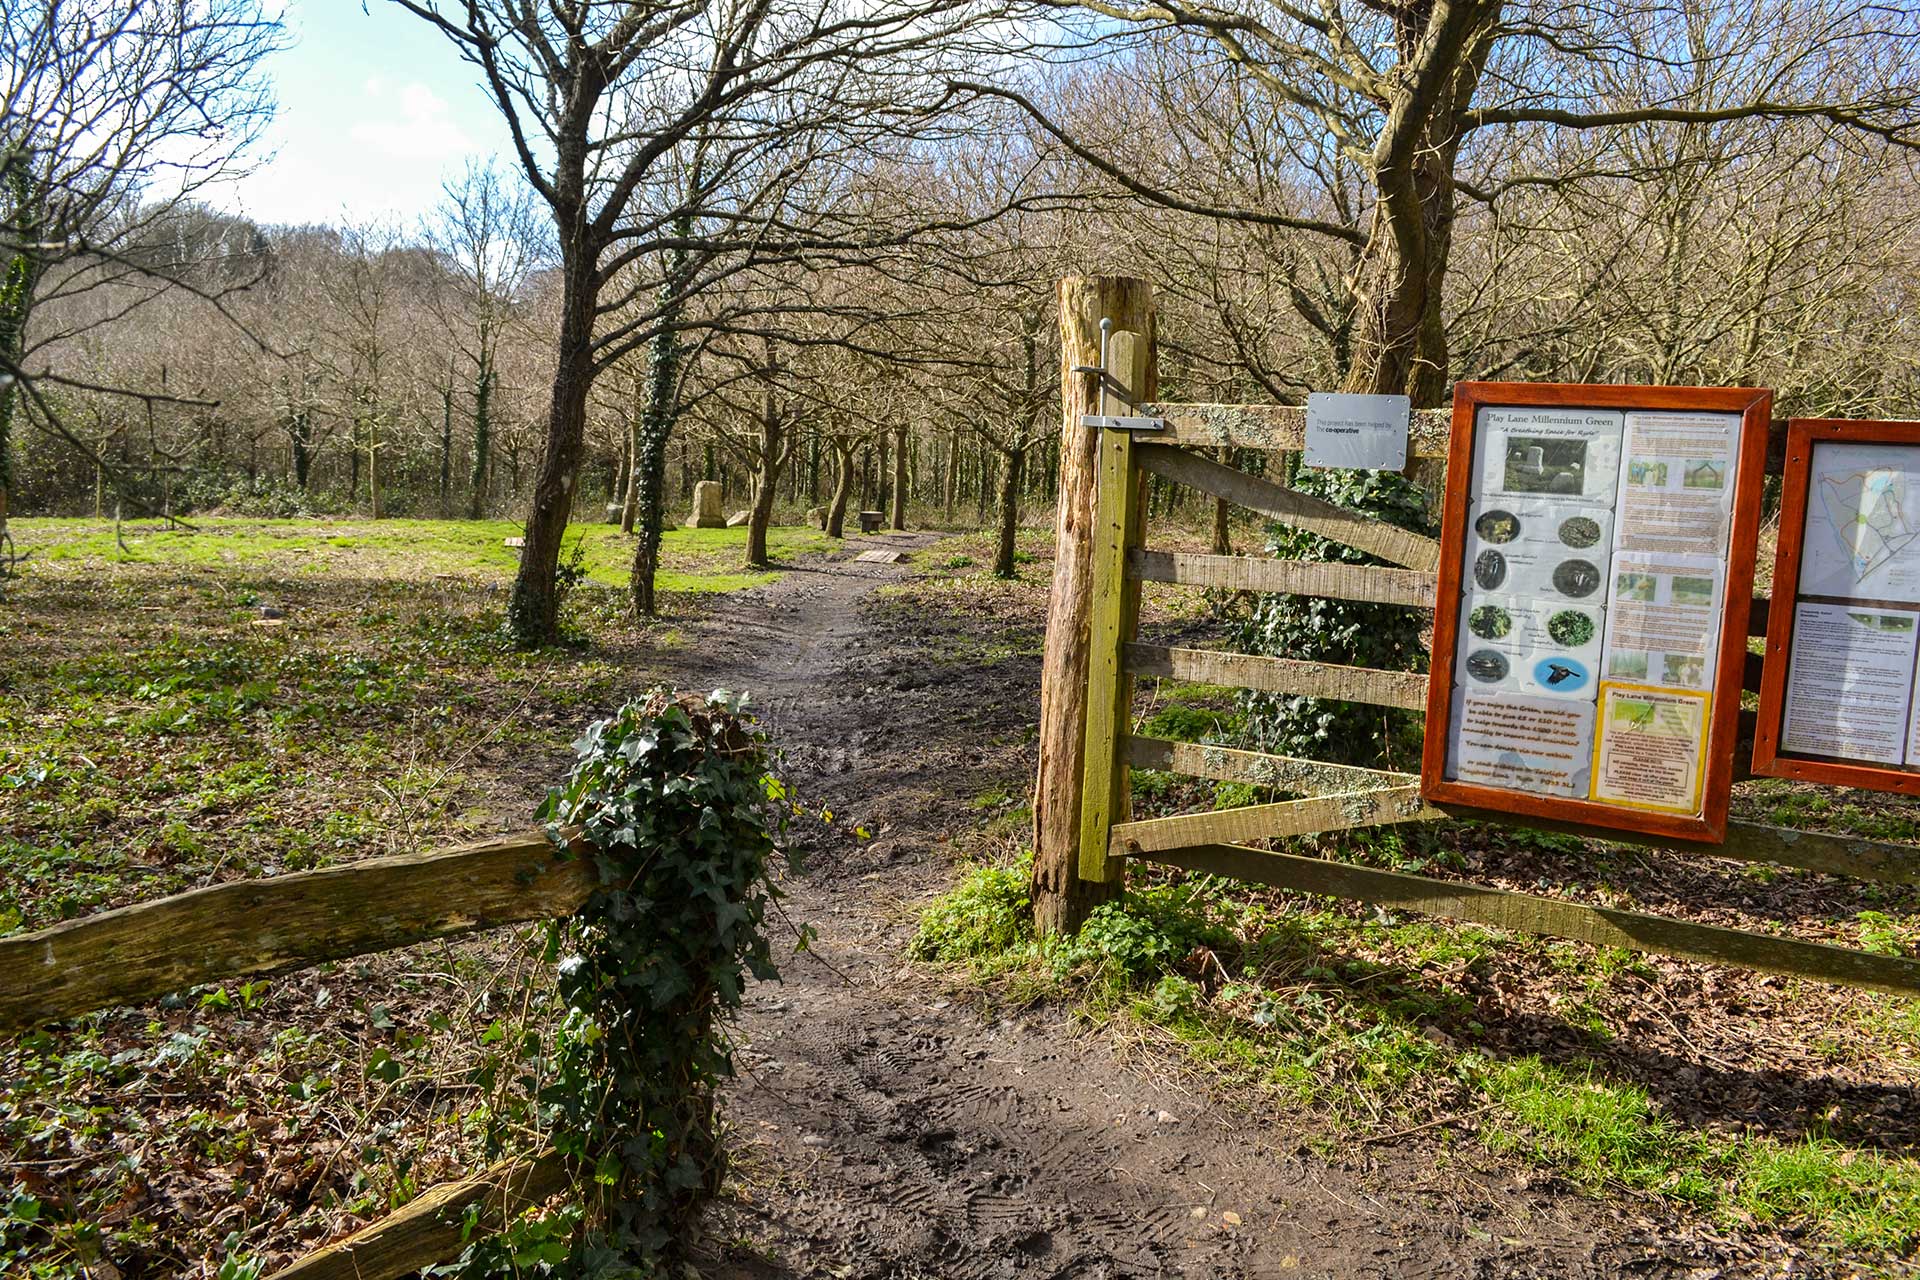 Nominate Play Lane Millennium Green in the ‘Movement For Good’ festive financial boost!